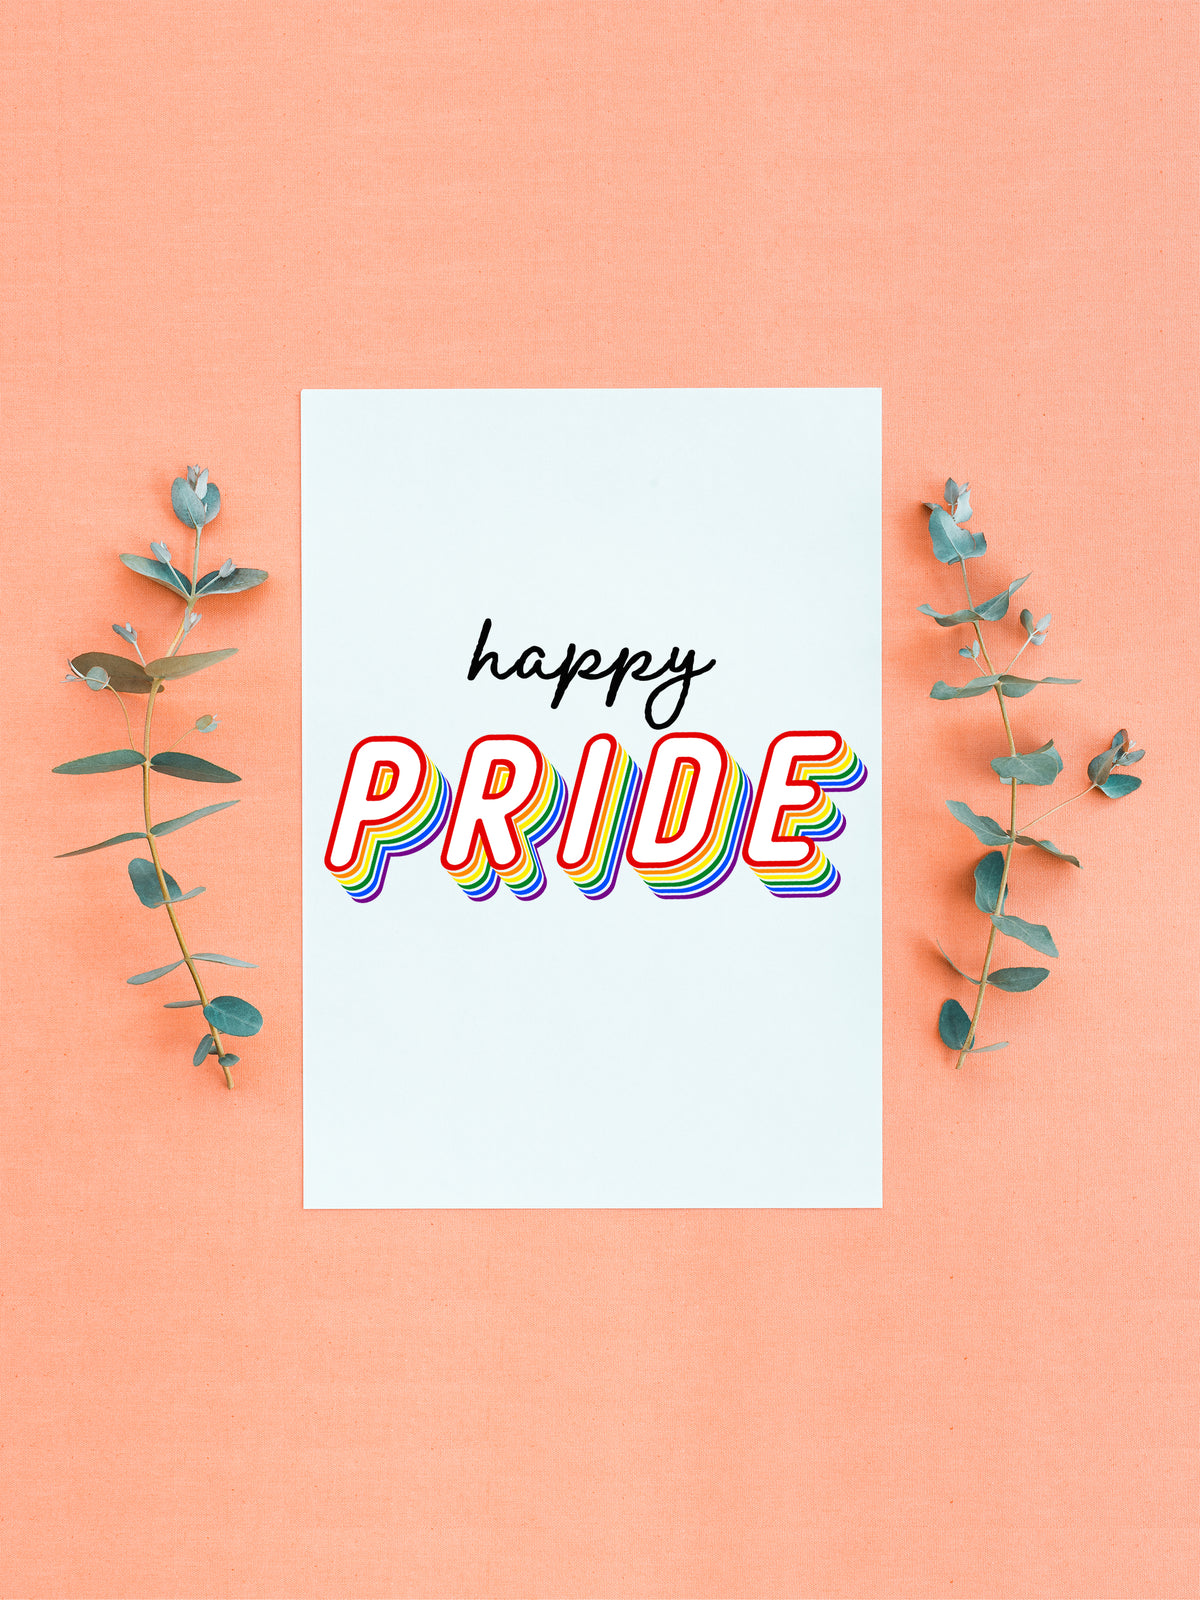 Happy Pride LGBTQ Rainbow Greeting Card,LGBTQ Pride Card,Gay Pride Rainbow Card,Celebrate Pride Month,Pride Month Card, Made in USA Happy is in black lettering and Pride is in rainbow color fashion